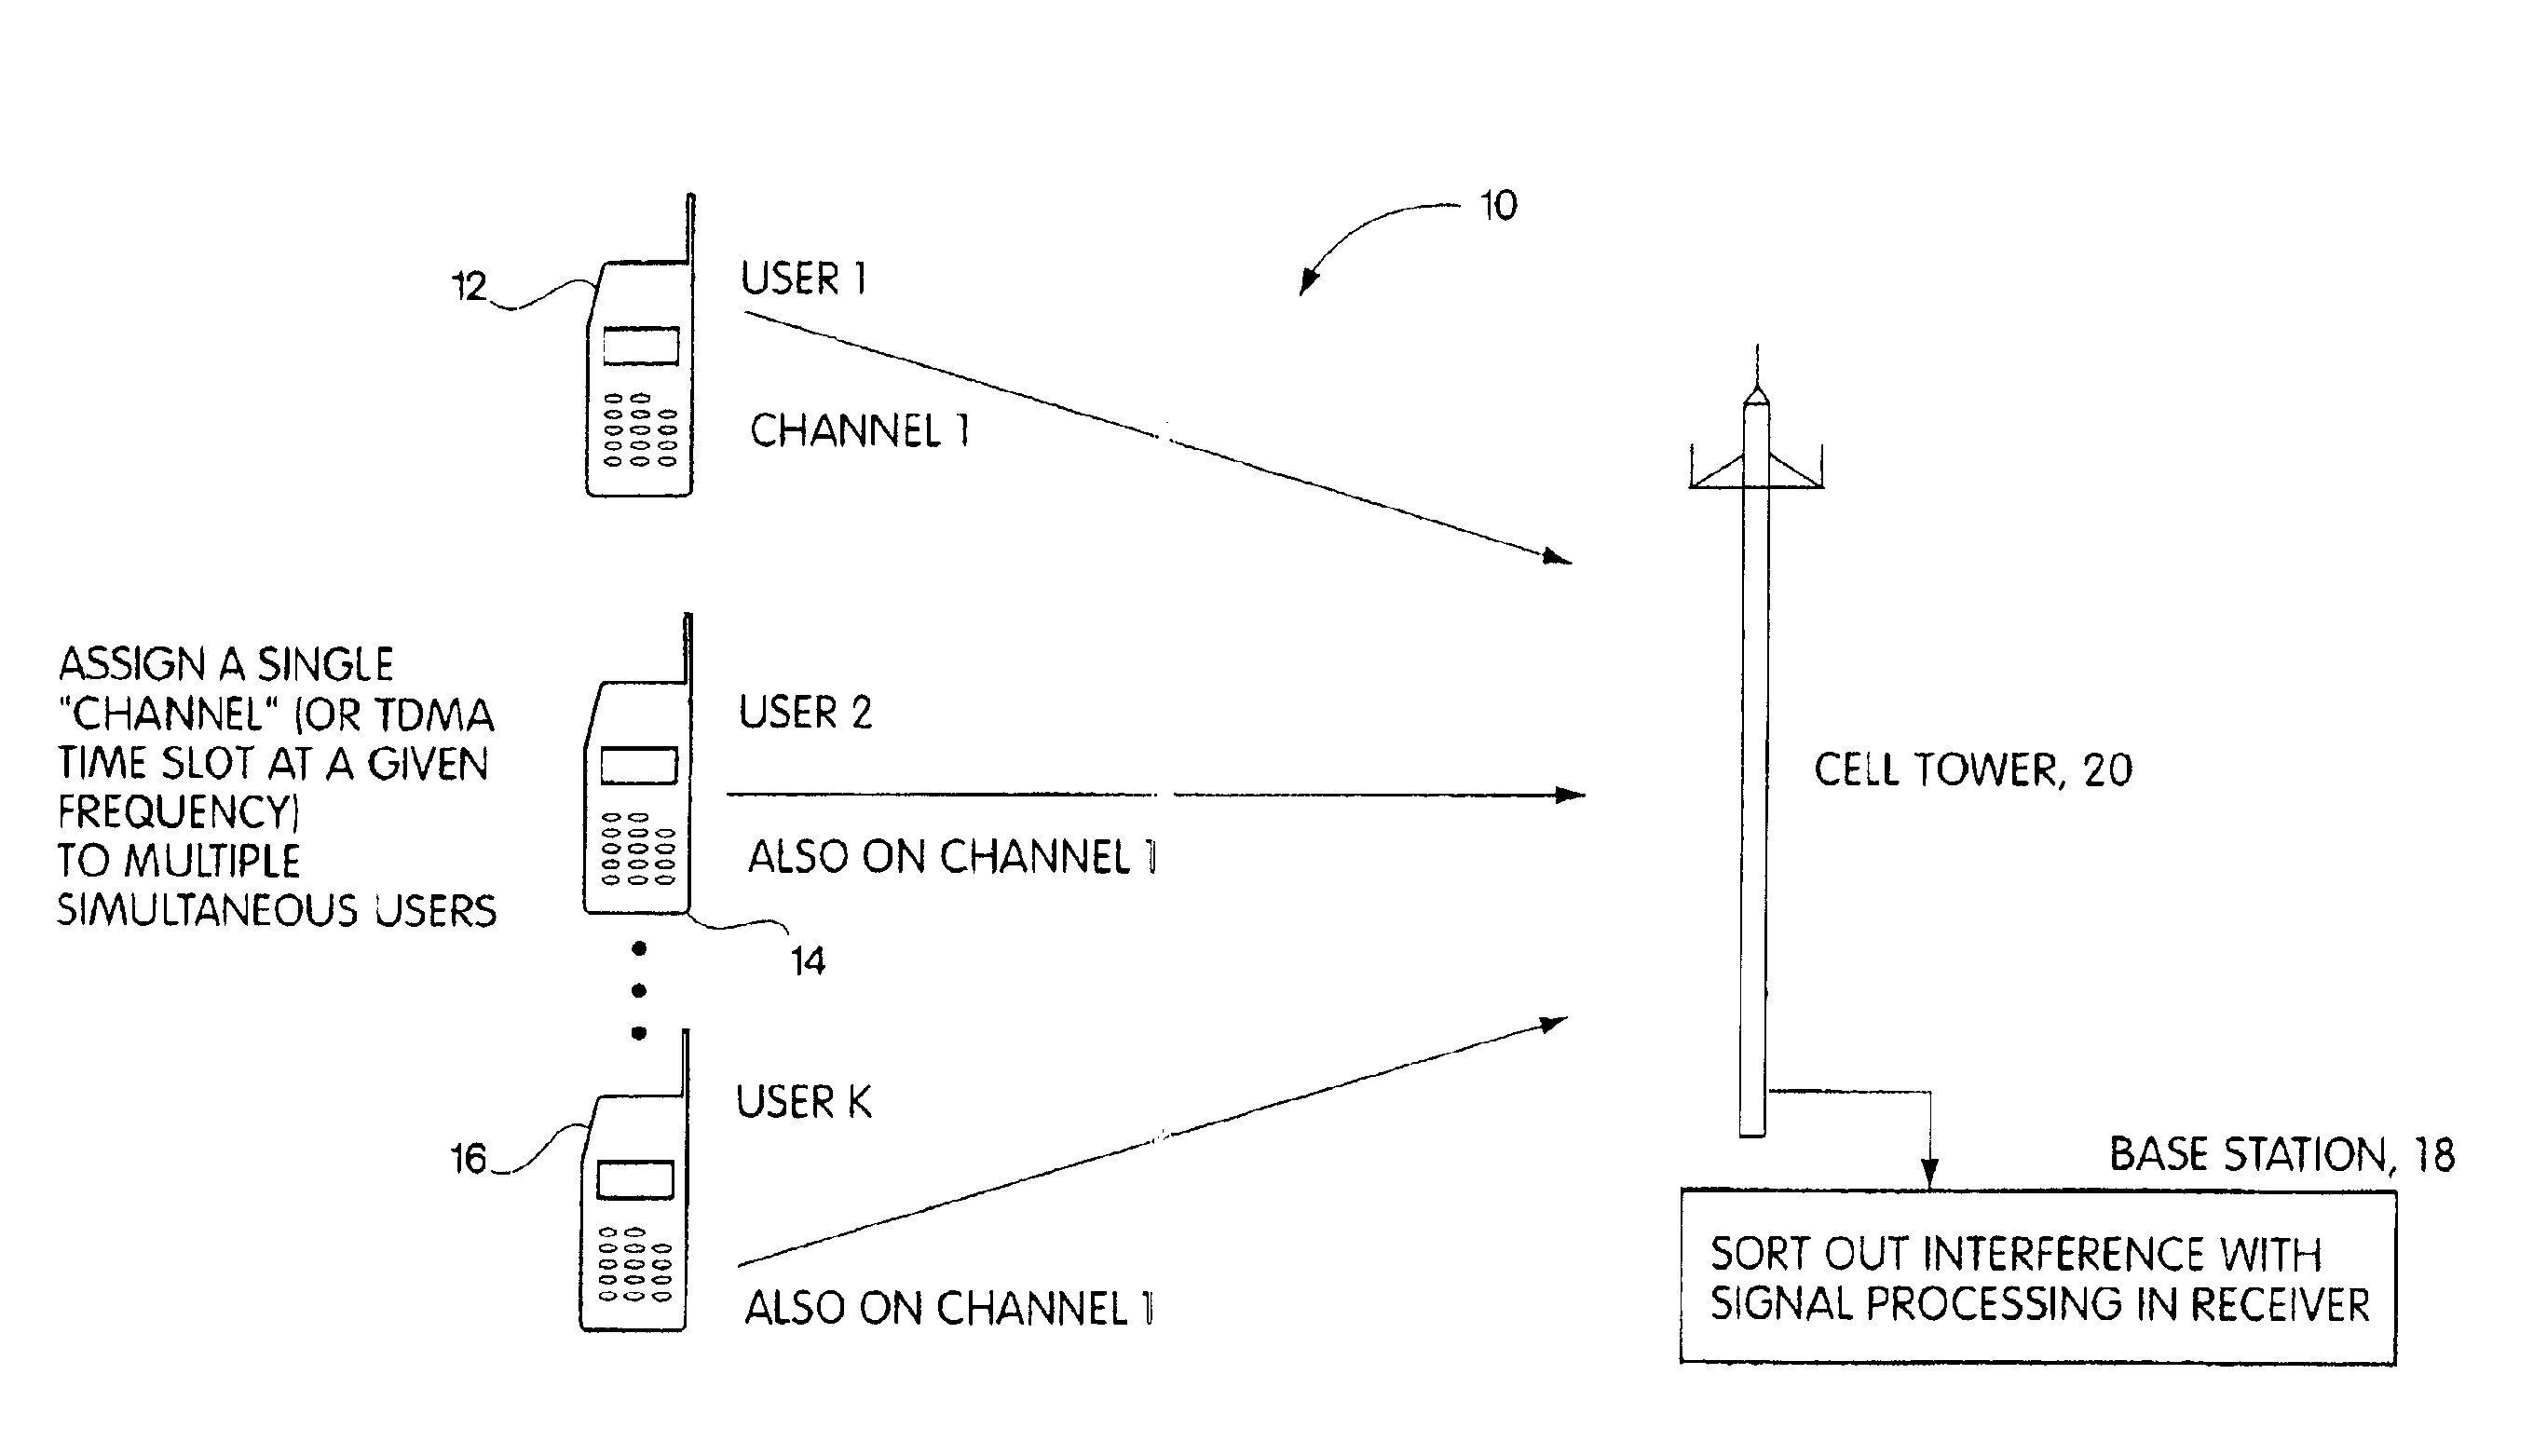 Method for overusing frequencies to permit simultaneous transmission of signals from two or more users on the same frequency and time slot